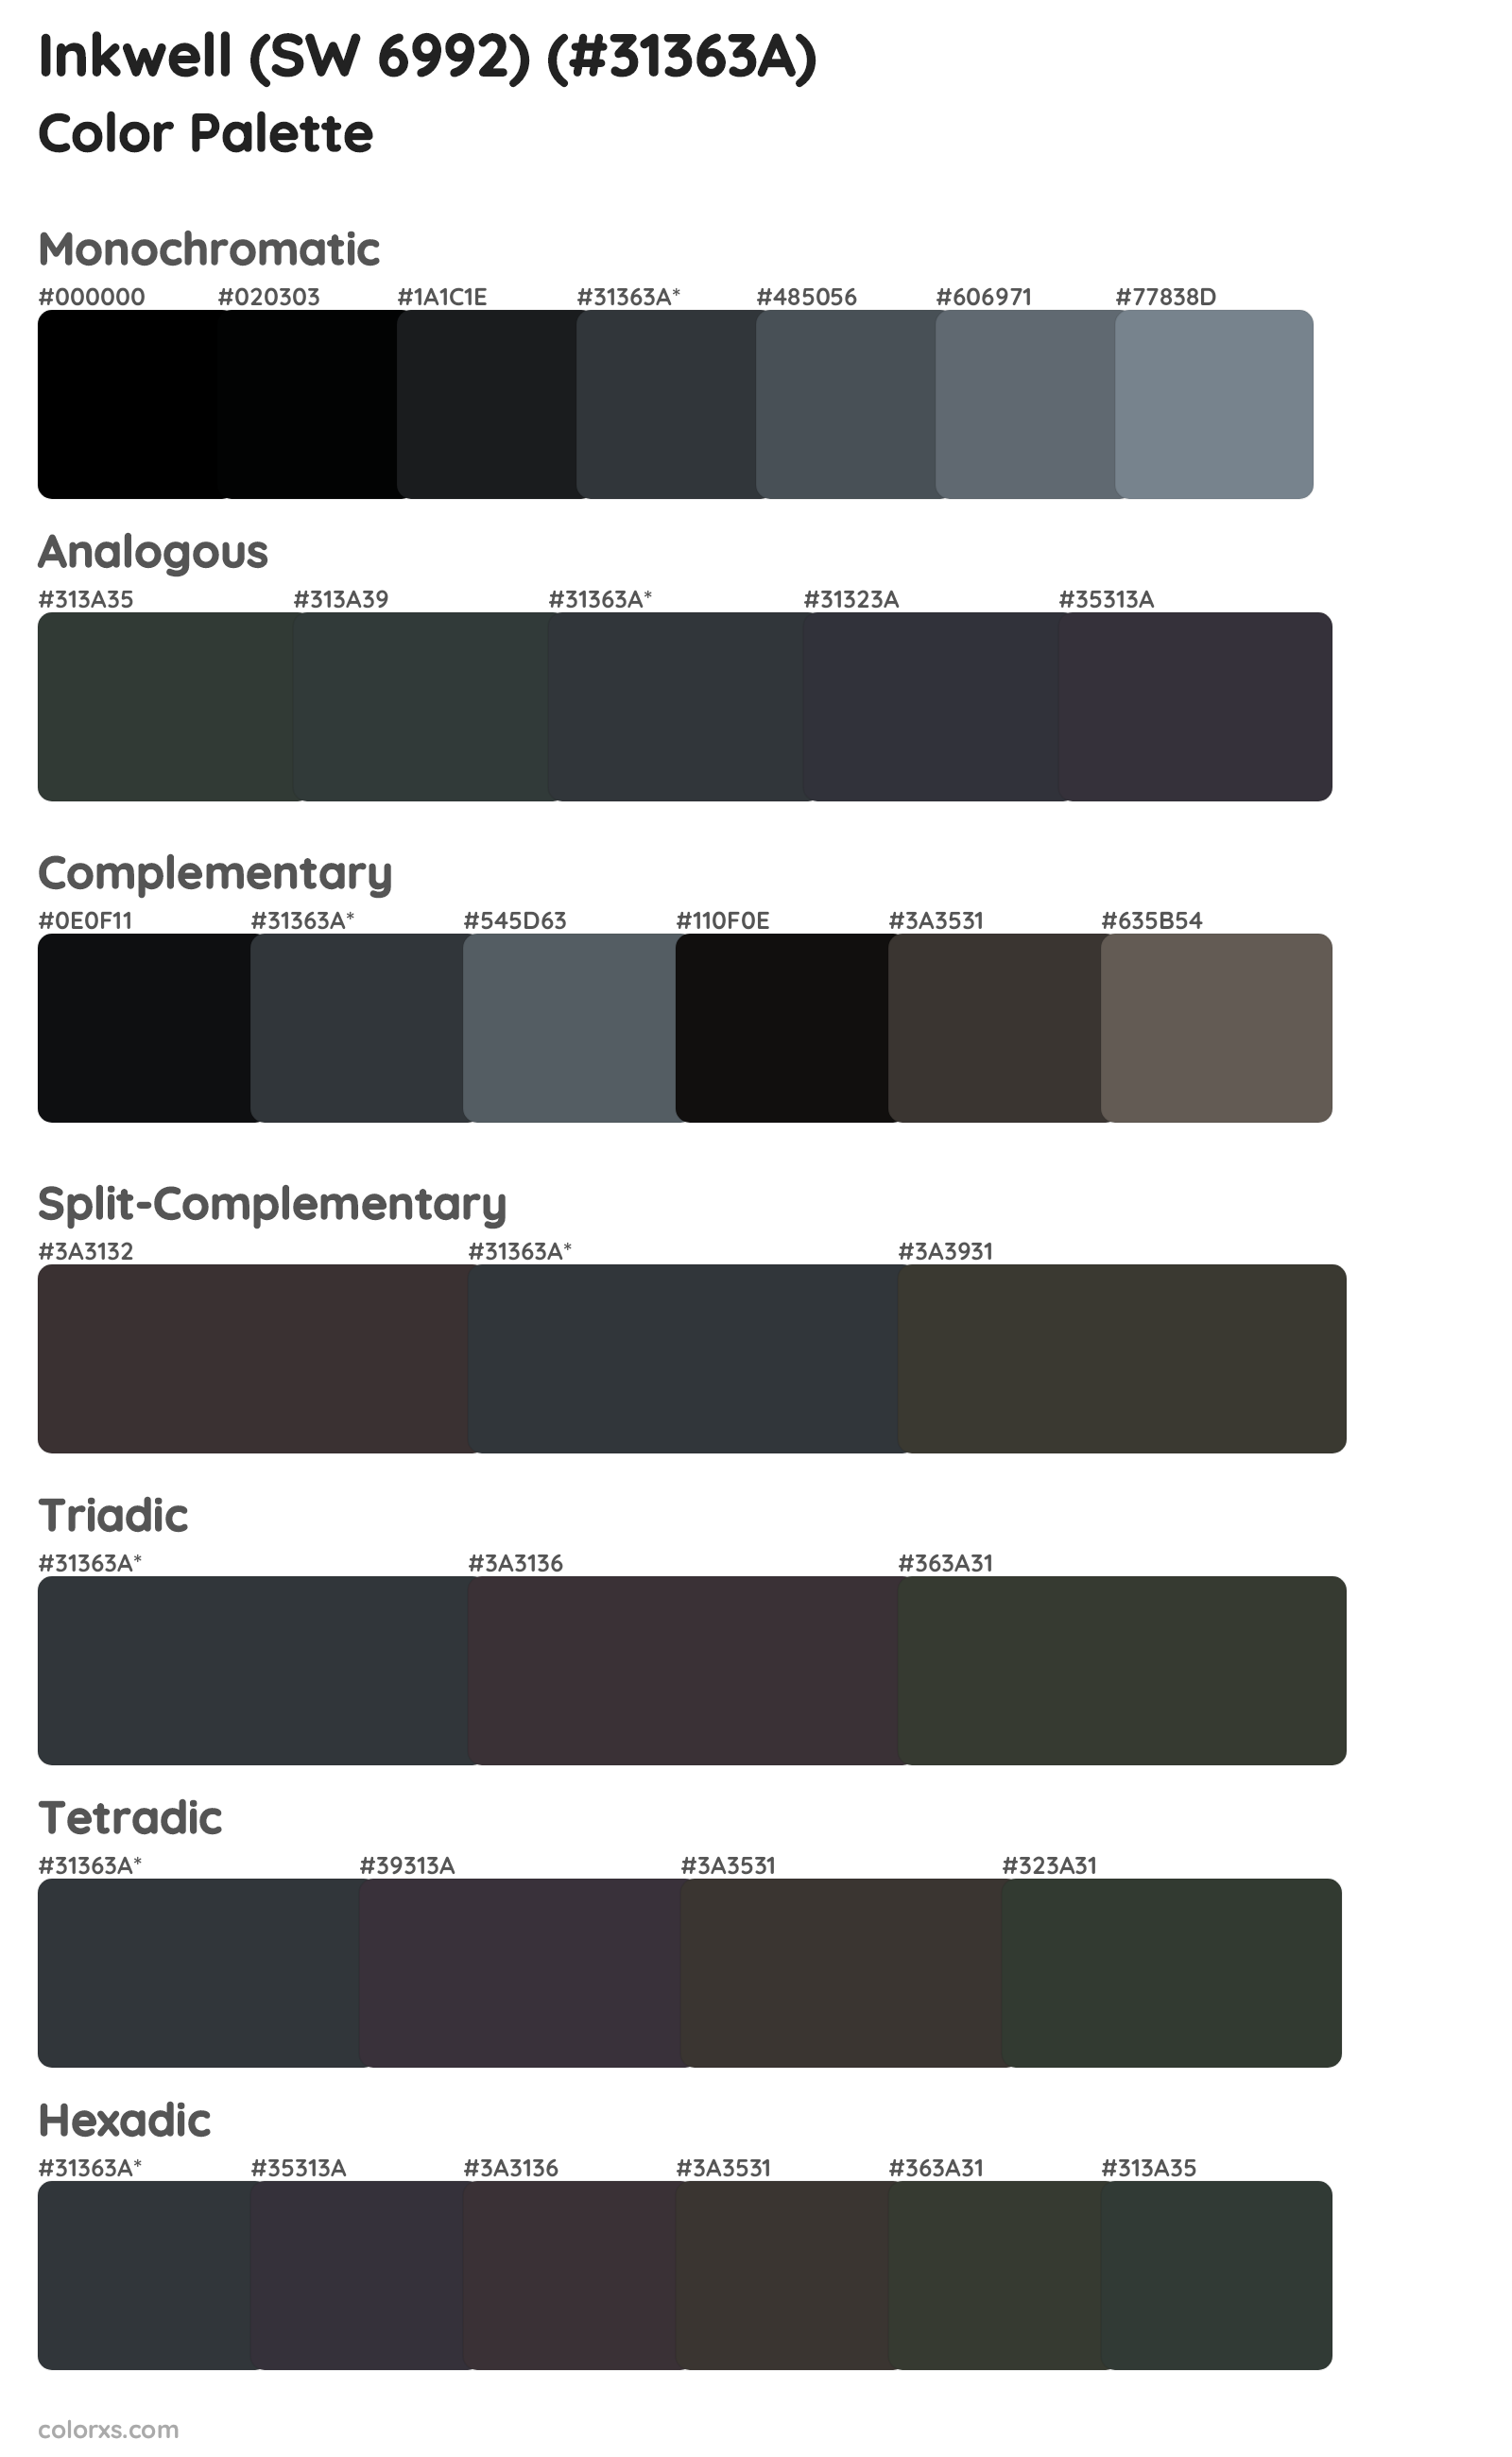 Inkwell (SW 6992) Color Scheme Palettes